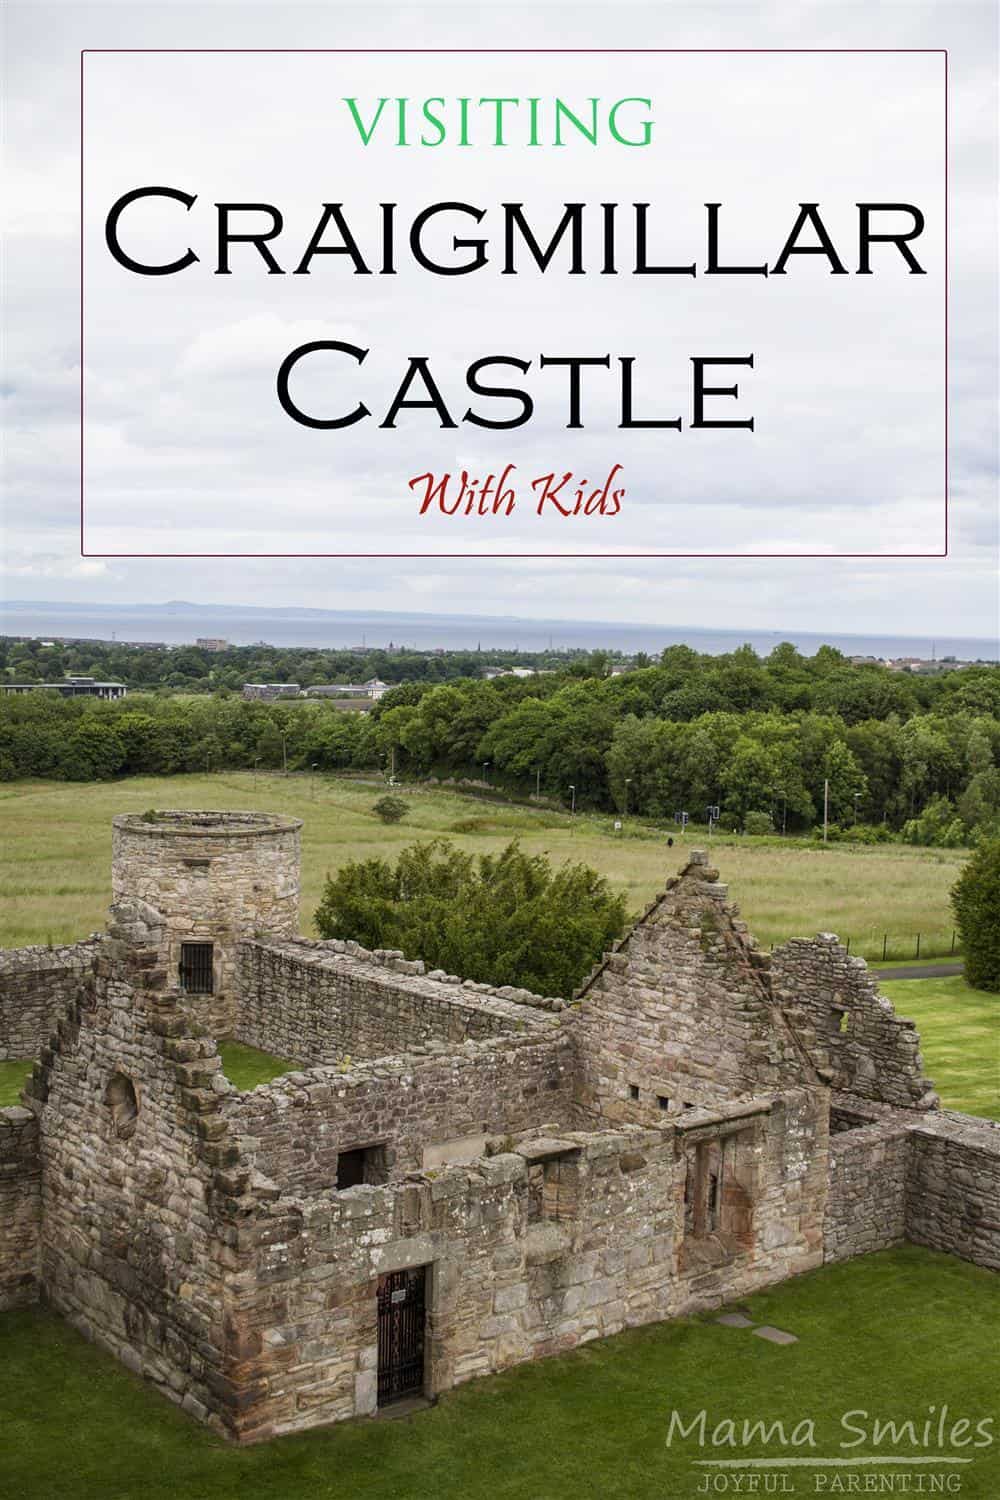 Craigmillar castle is a wonderful introduction to medieval history for kids! Great tips for visiting Craigmillar Castle in this post.